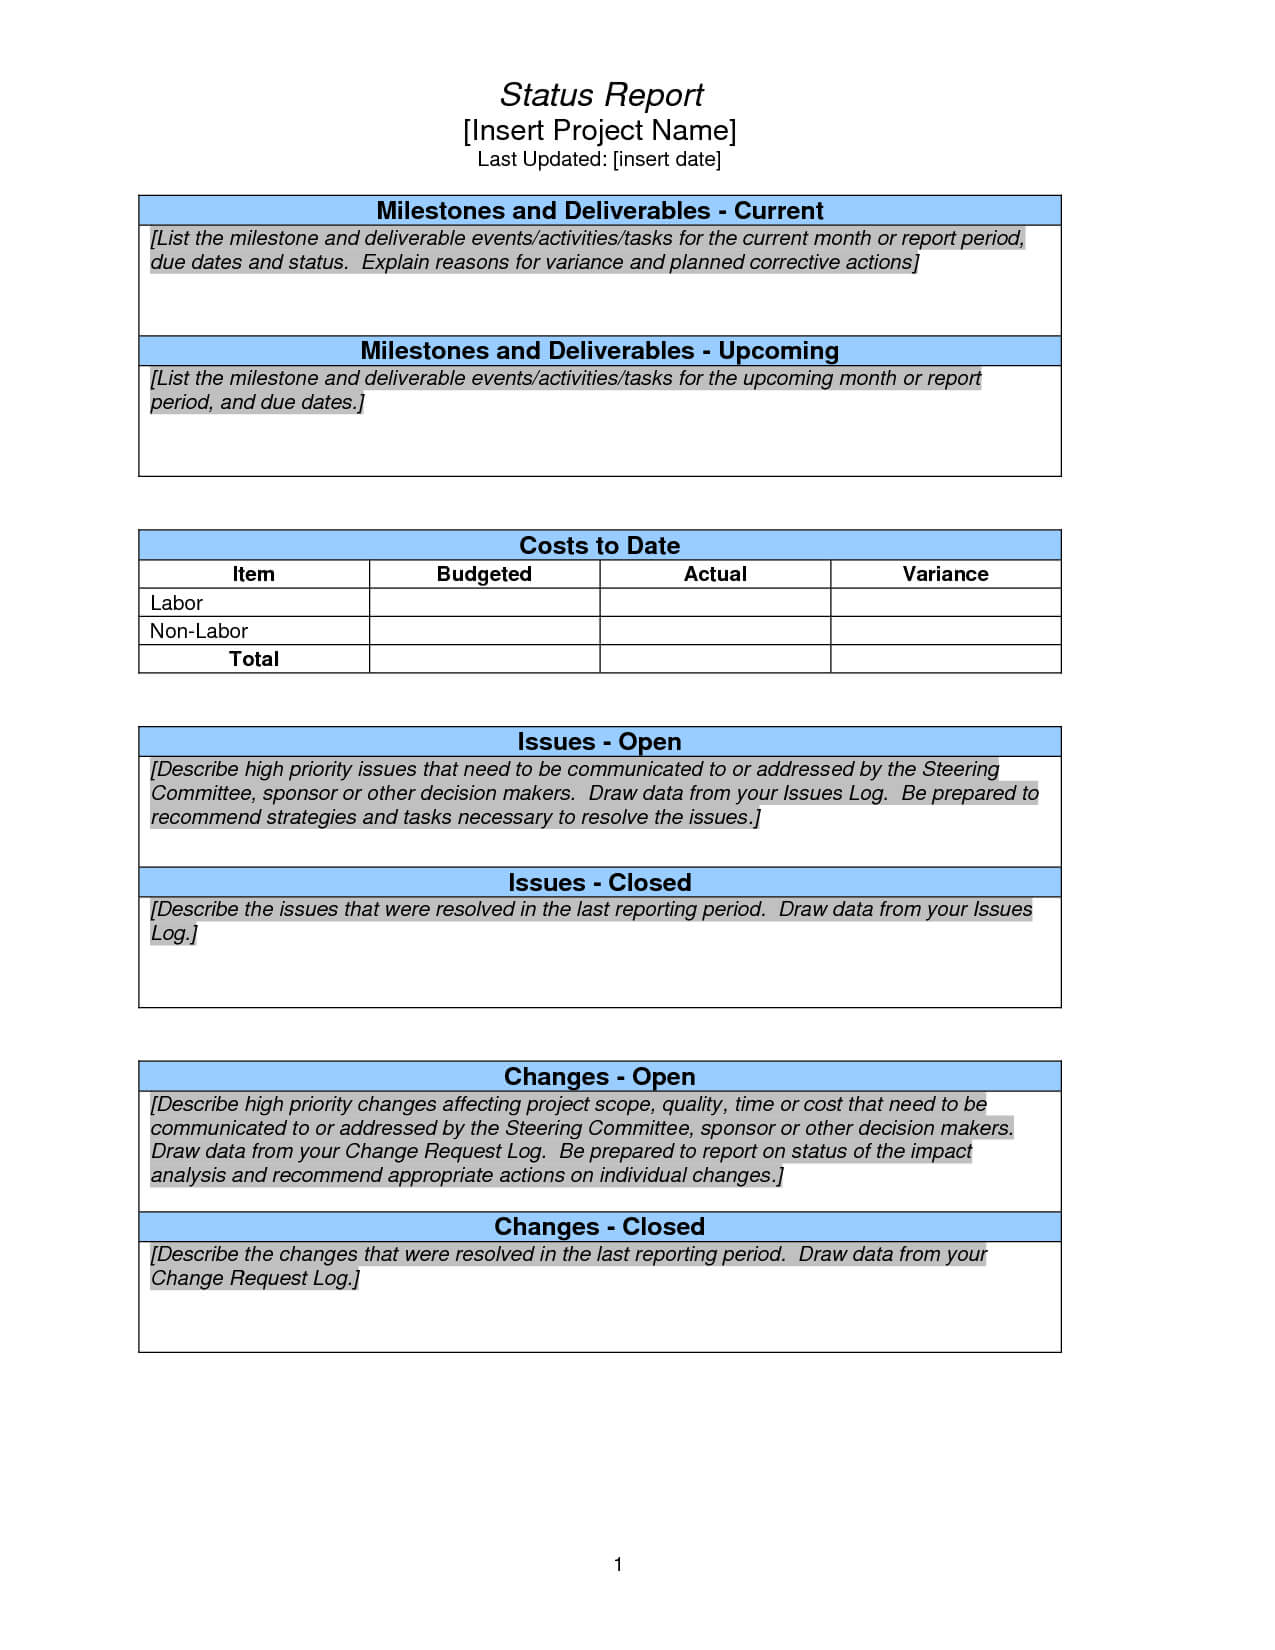 Project Status Report Sample | Project Status Report, Report Inside Project Analysis Report Template